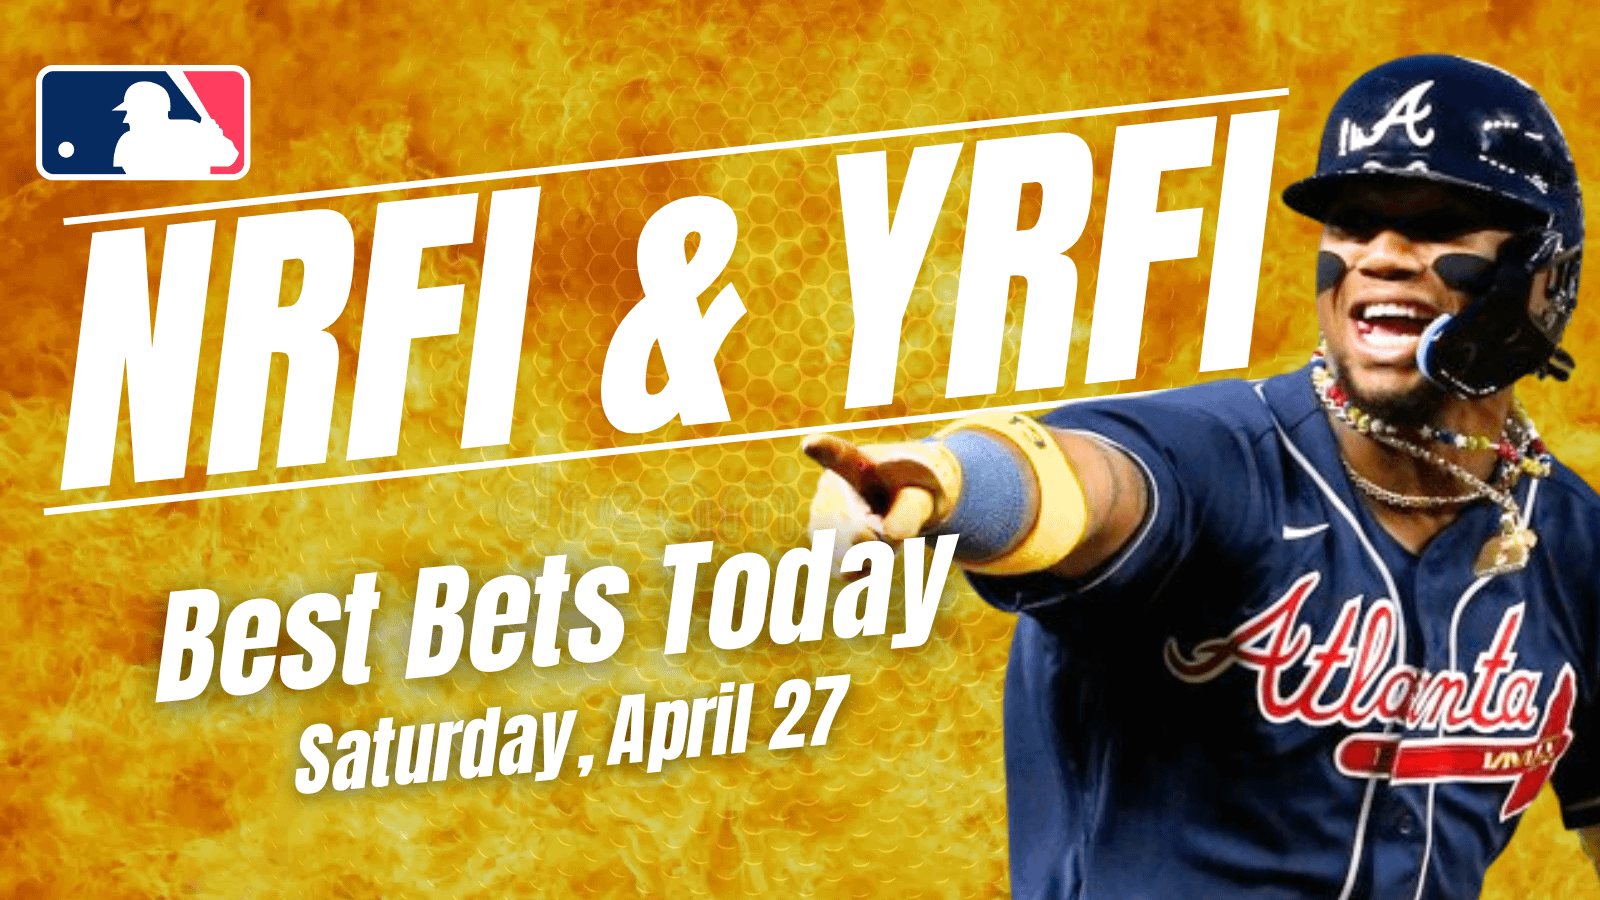 Looking for the top NRFI & YRFI bets today? We dive into the best first inning bets for Saturday, April 27, including...